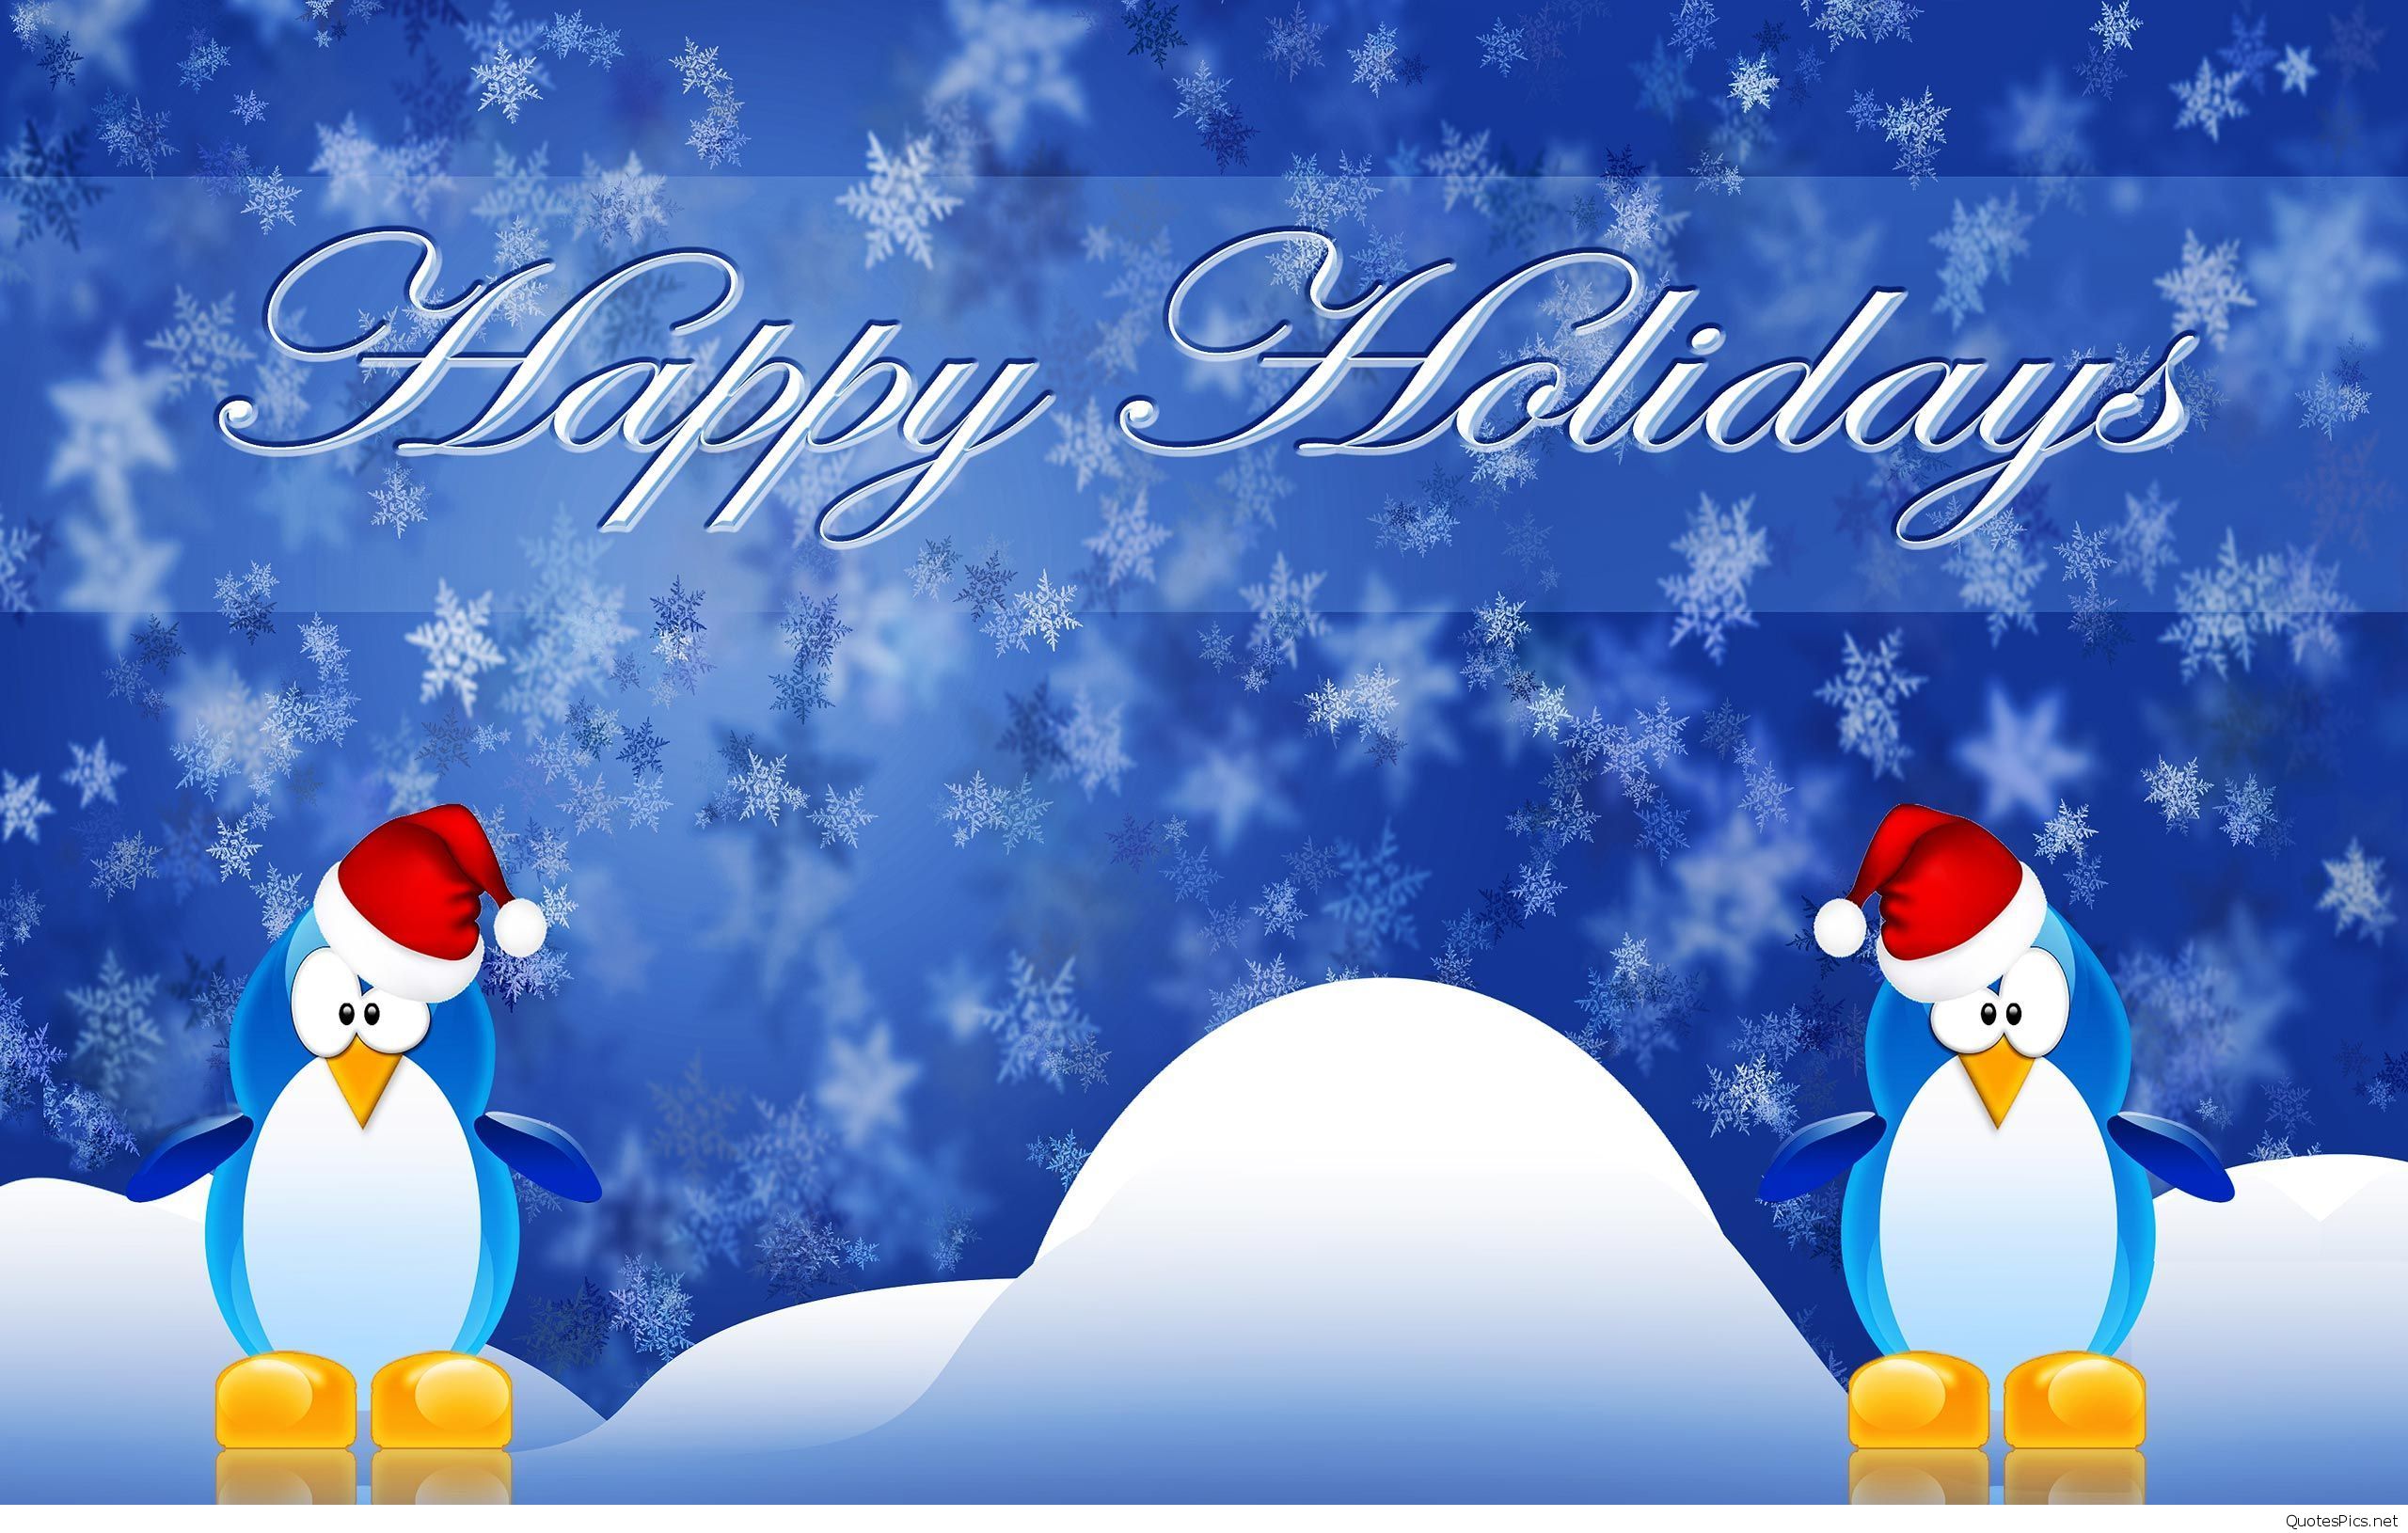 Best Happy Winter Wishes Wallpaper Quotes